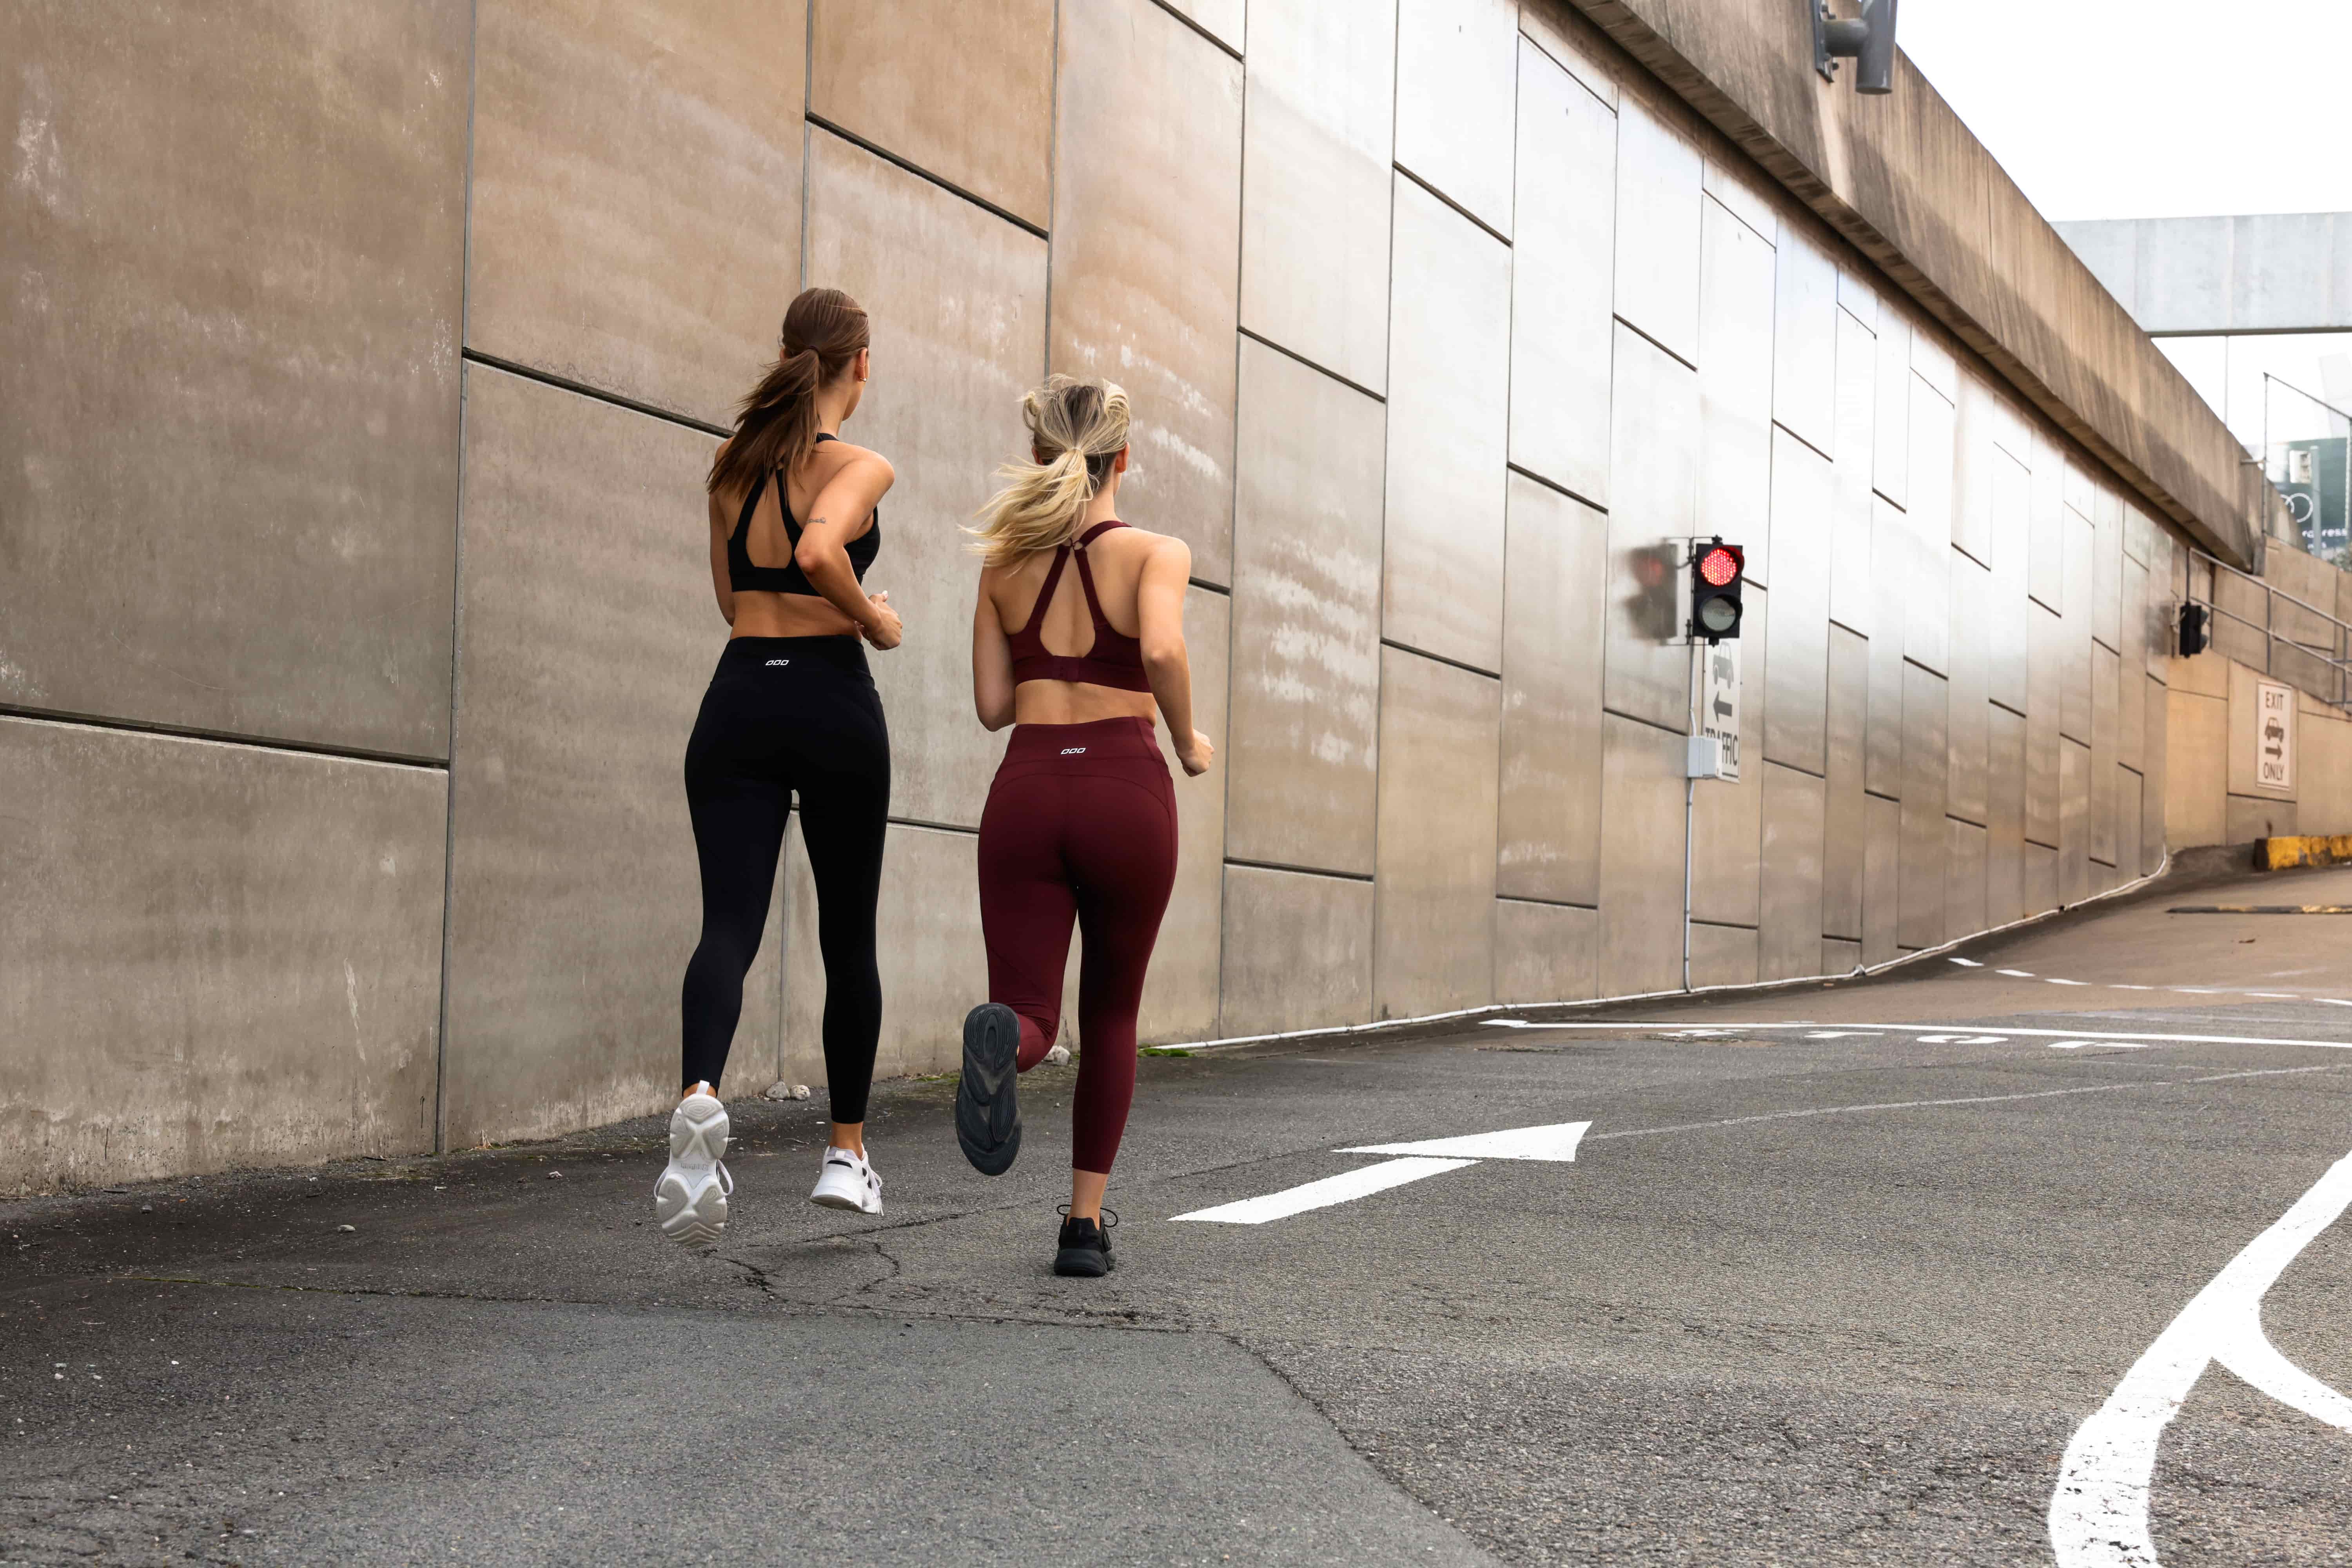 Wide Back shot of two models running wearing Amy sports bra and leggings